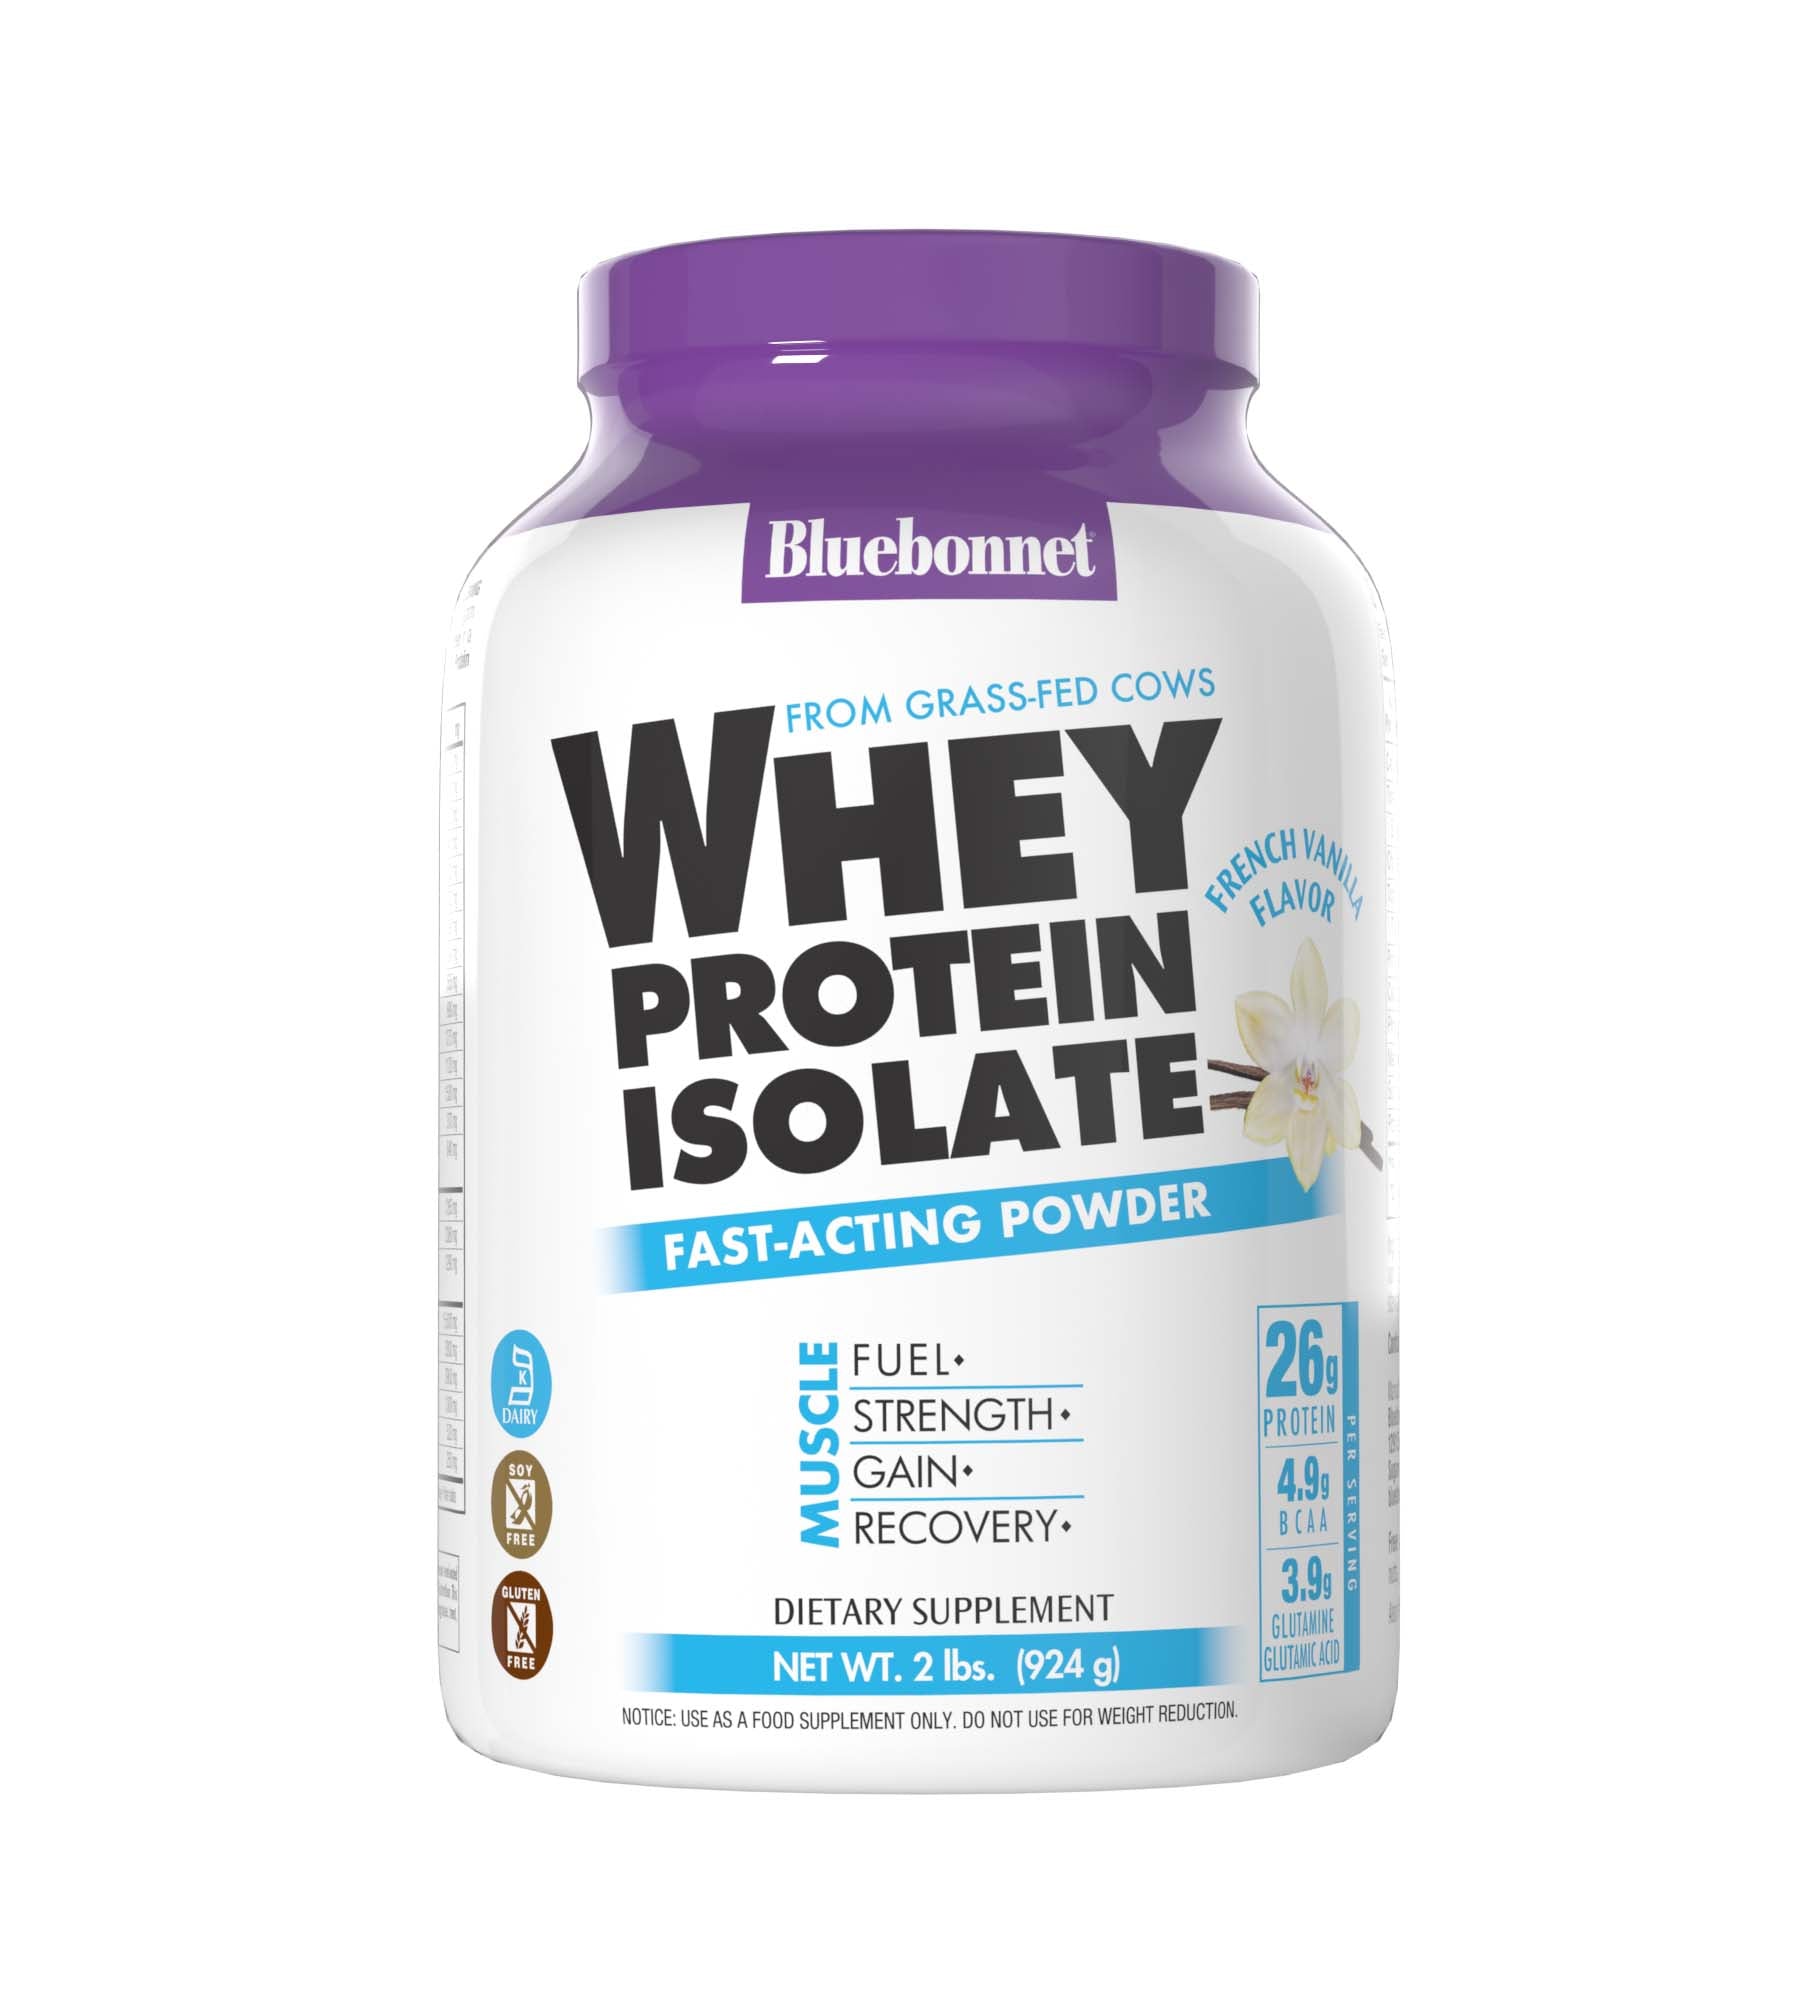 Bluebonnet's Whey Protein Isolate Powder. French vanilla flavor. 26 g of protein, 4.9 g BCAA and 3.9 g Glutamine Glutamic Acid per serving. #size_2 lb